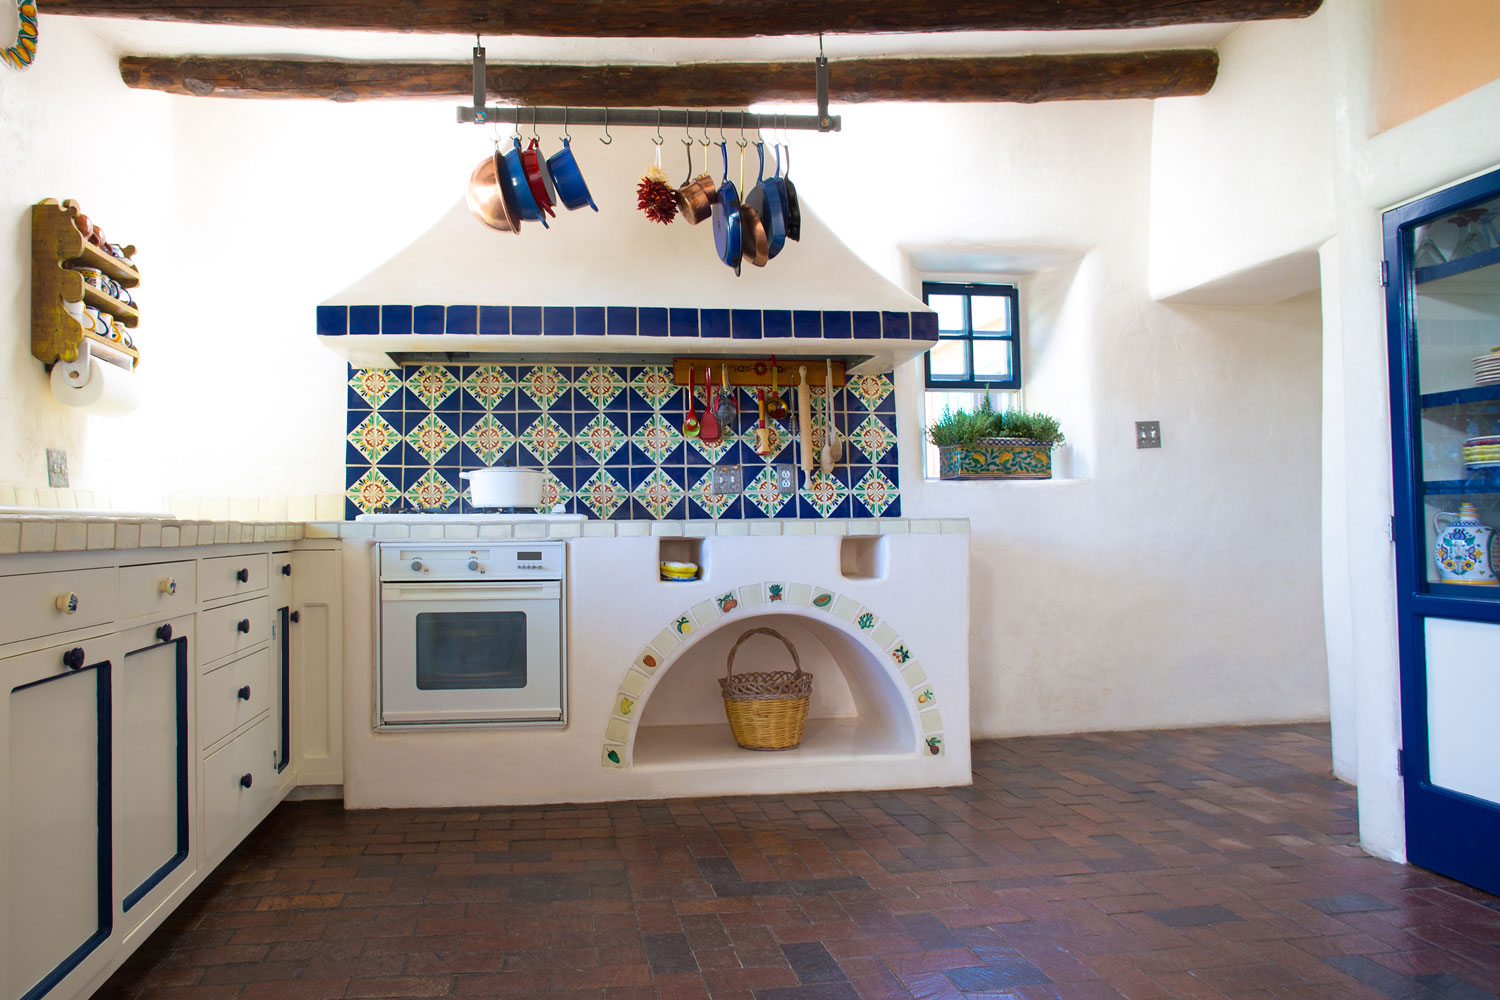 A Mexican inspired kitchen with white walls, blue decorative tiles and dark brown tiles, 15 Awesome Mexican Style Kitchen Ideas